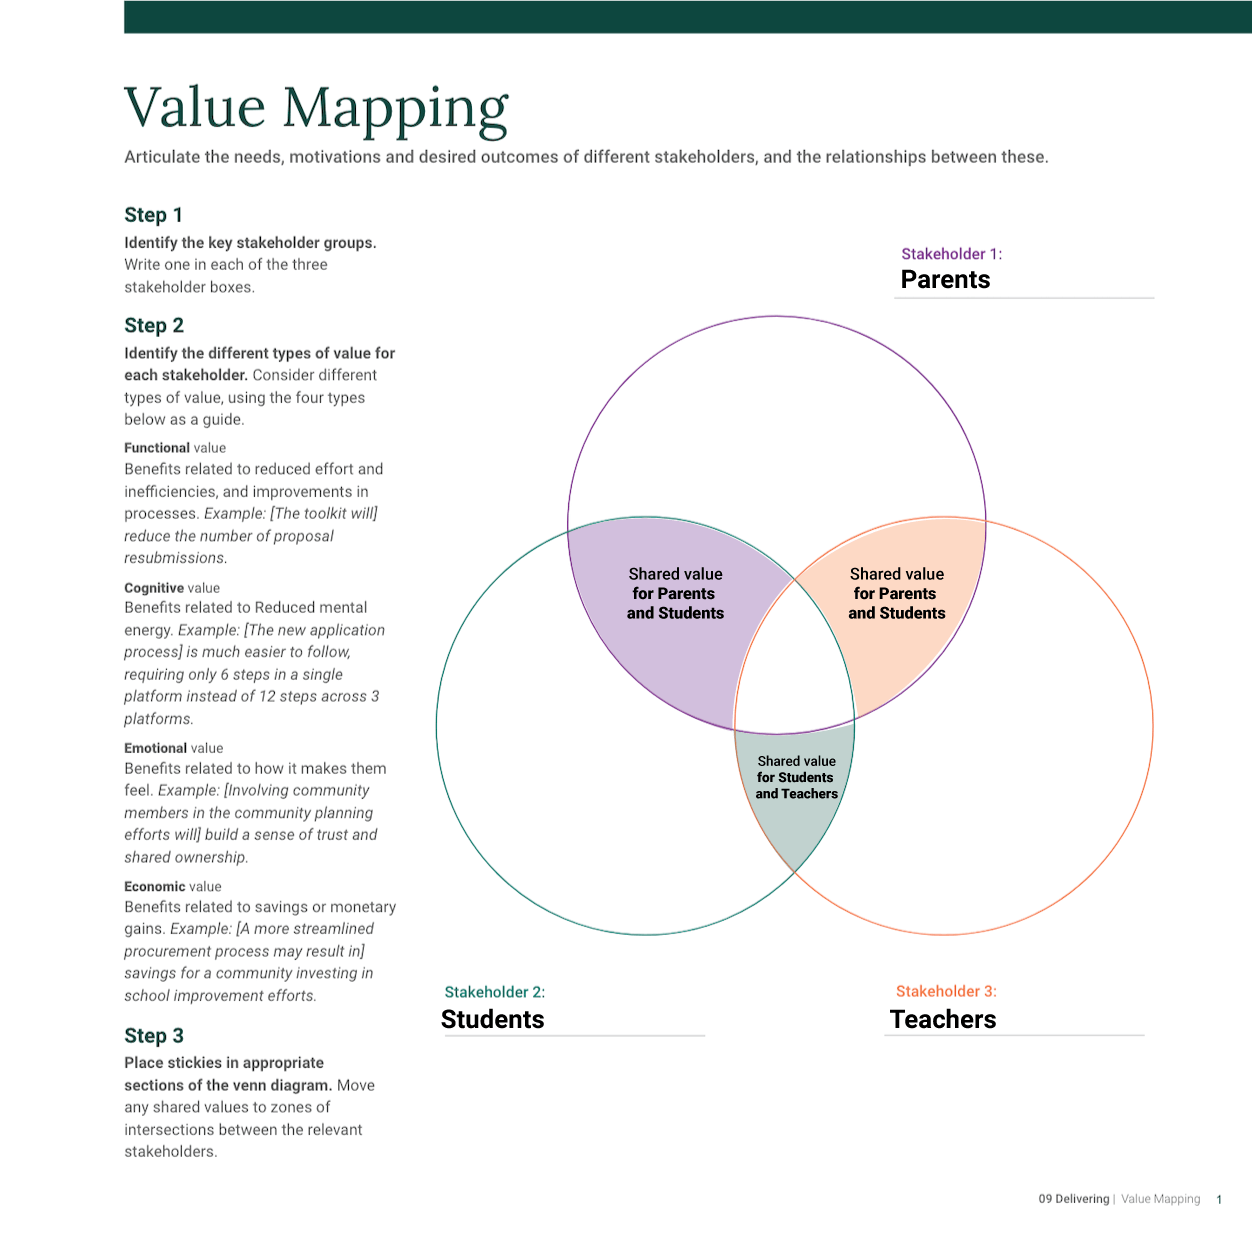 Value mapping venn diagram depicting connections between pairs